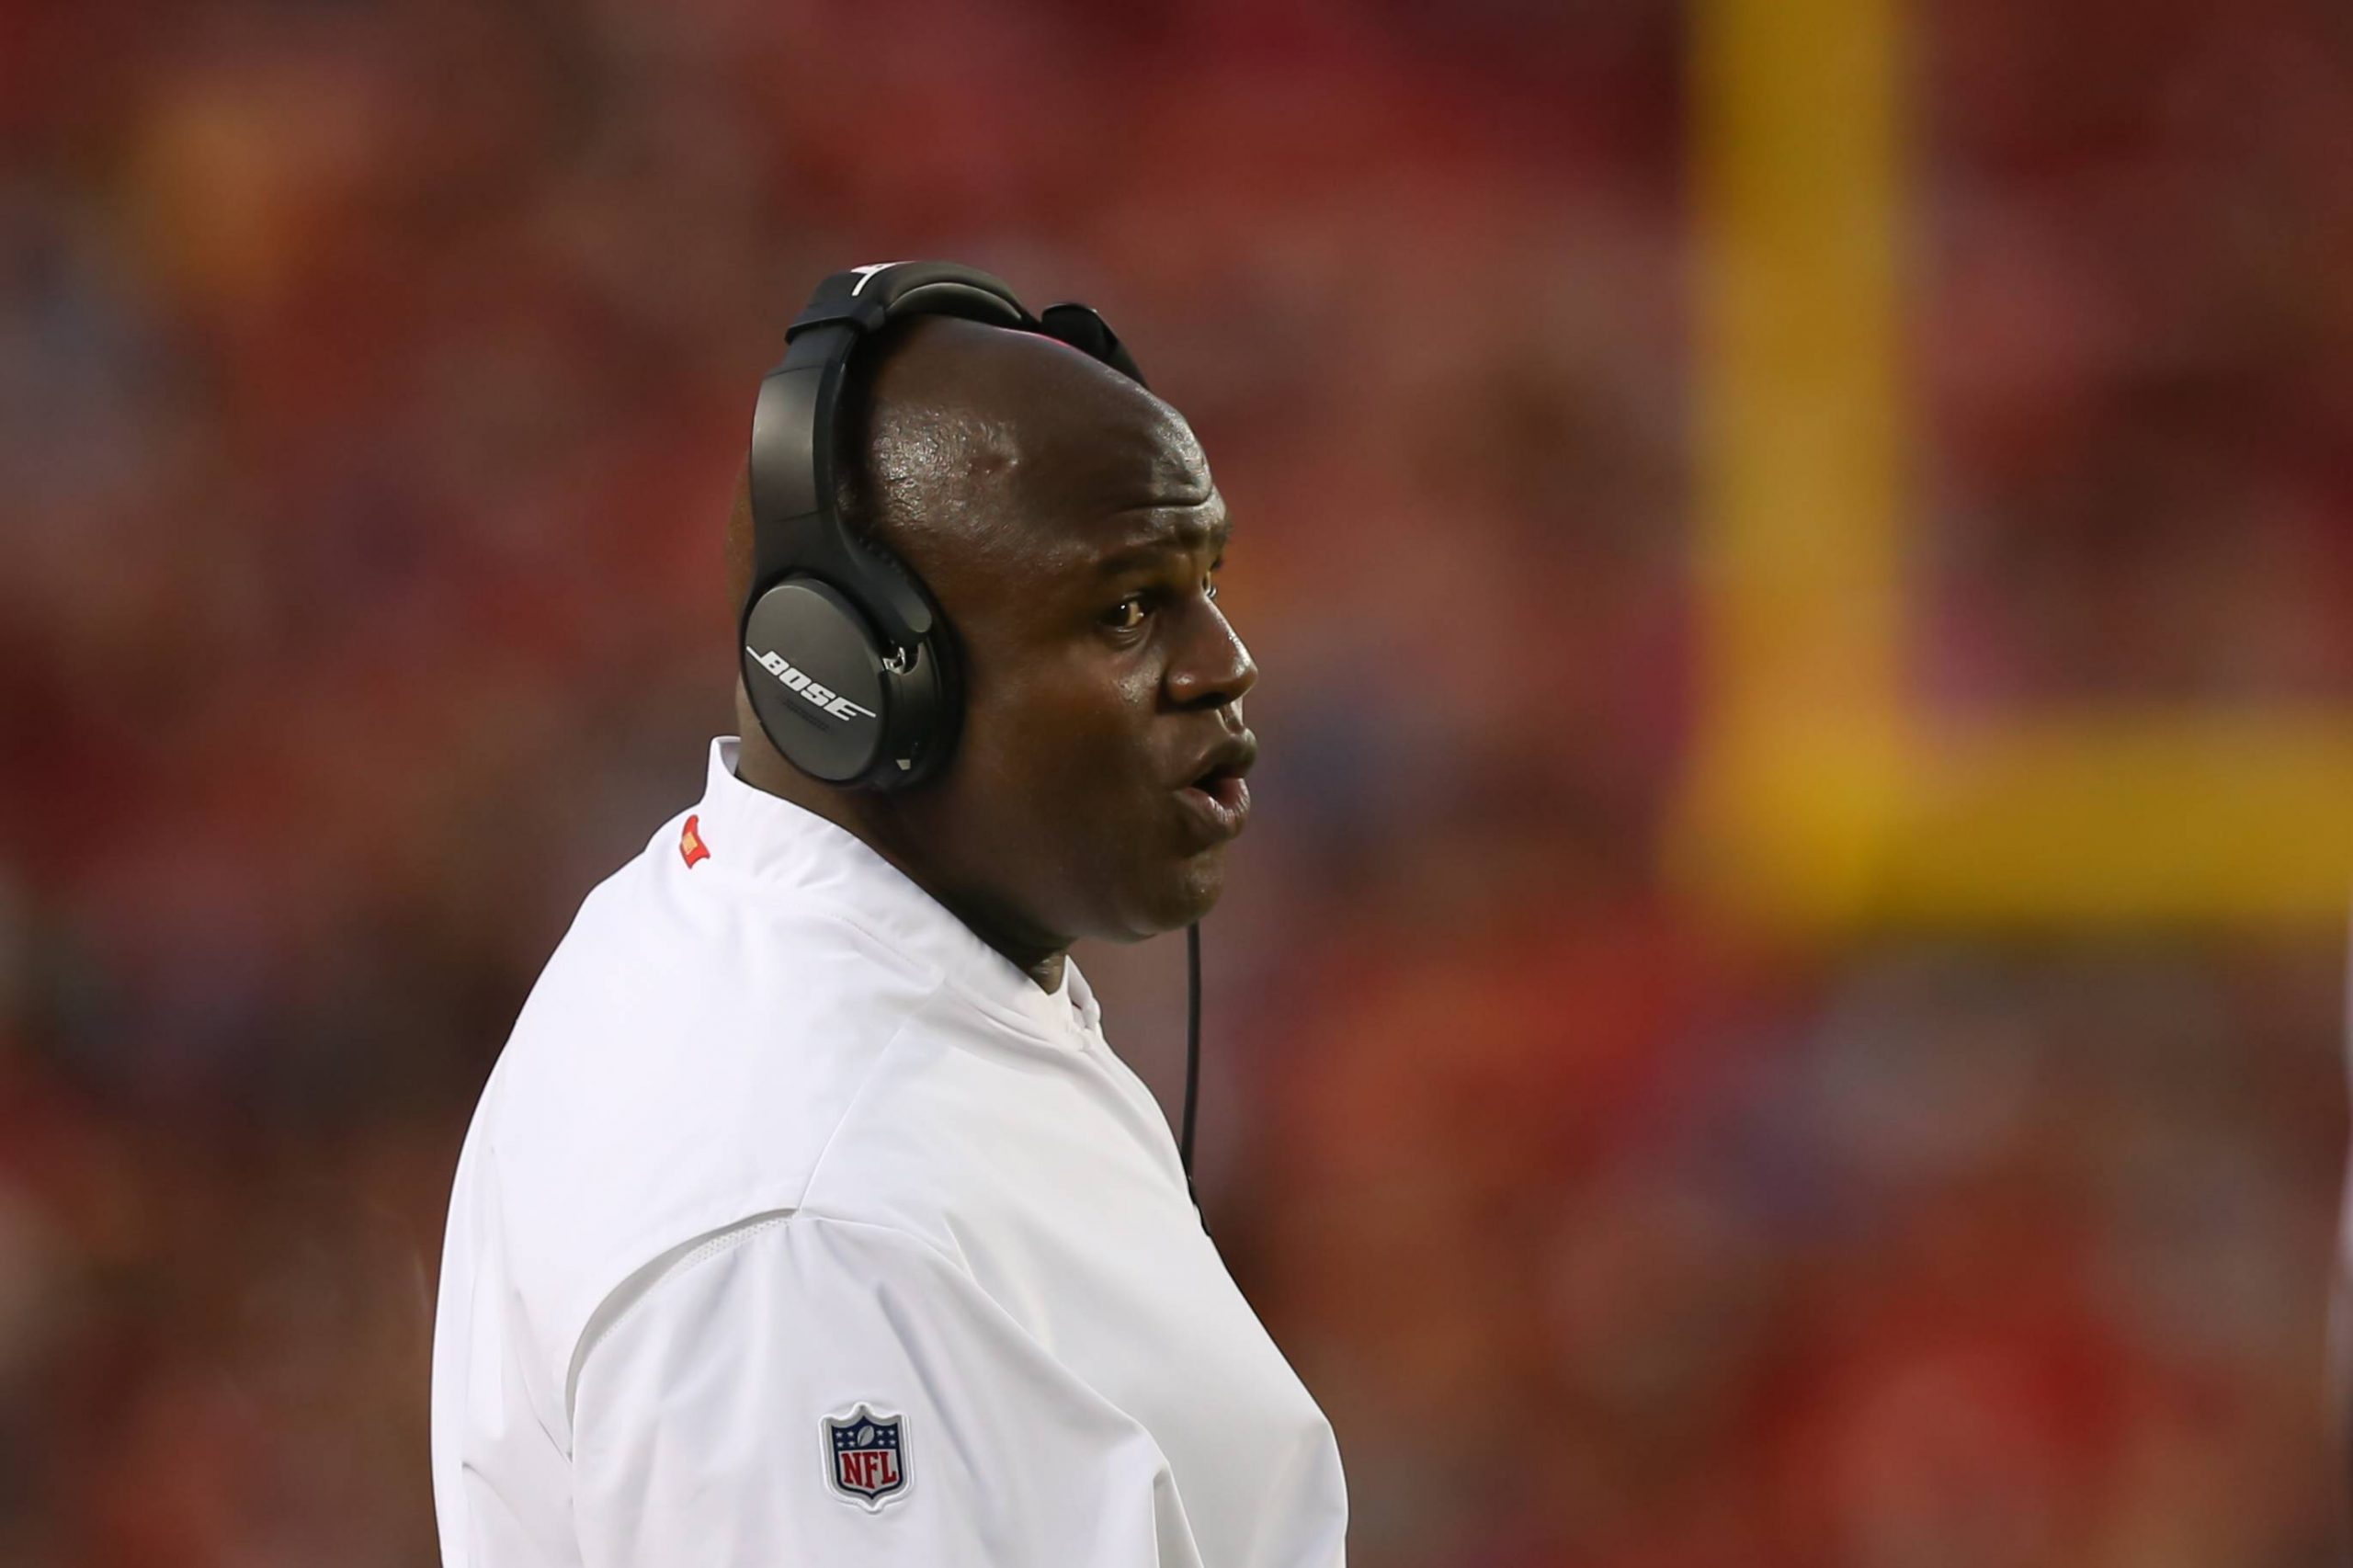 KANSAS CITY, MO - AUGUST 24: Kansas City Chiefs offensive coordinator Eric Bienemy in the first half of an NFL, American Football Herren, USA preseason game between the San Francisco 49 ers and Kansas City Chiefs on August 24, 2019 at Arrowhead Stadium in Kansas City, MO. (Photo by Scott Winters/Icon Sportswire) NFL: AUG 24 Preseason - 49ers at Chiefs PUBLICATIONxINxGERxSUIxAUTxHUNxRUSxSWExNORxDENxONLY Icon190824070